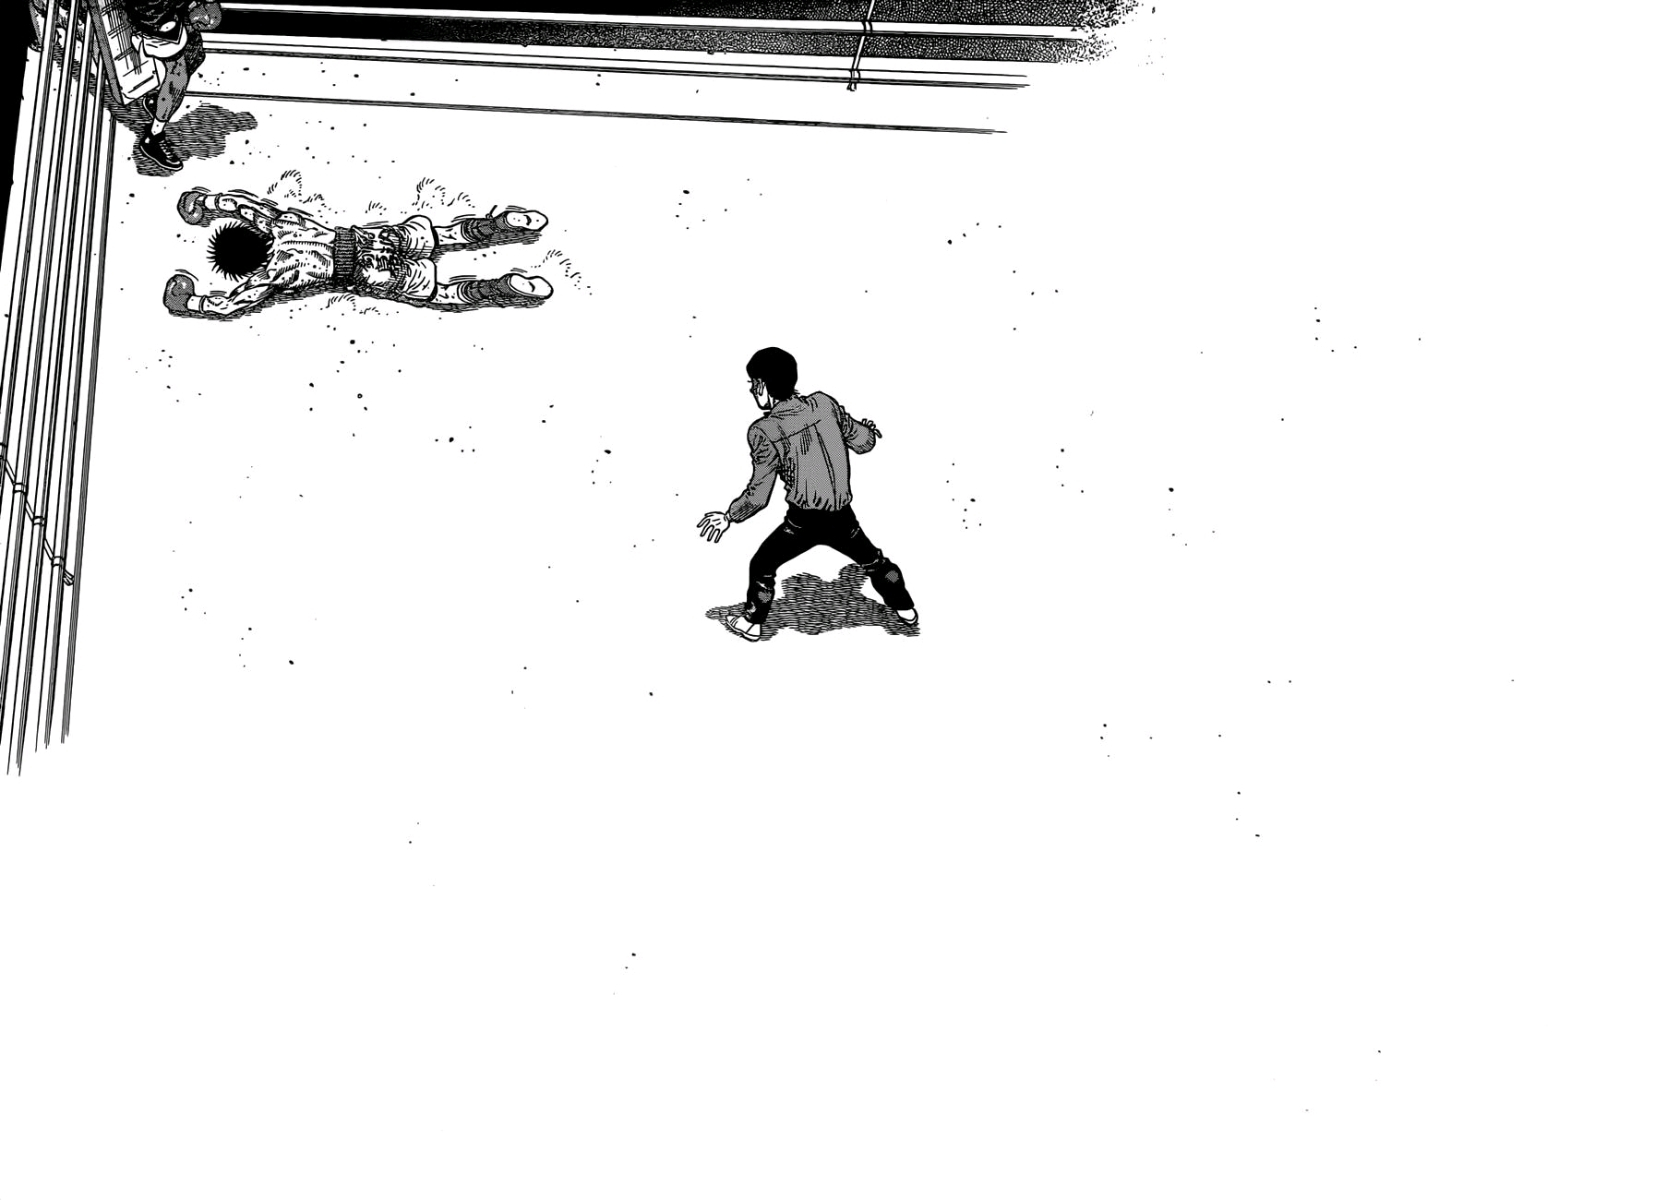 Ippo lies flat on his face in the corner. The referee leans forward towards his prone body. A two page spread fades into a field of white.